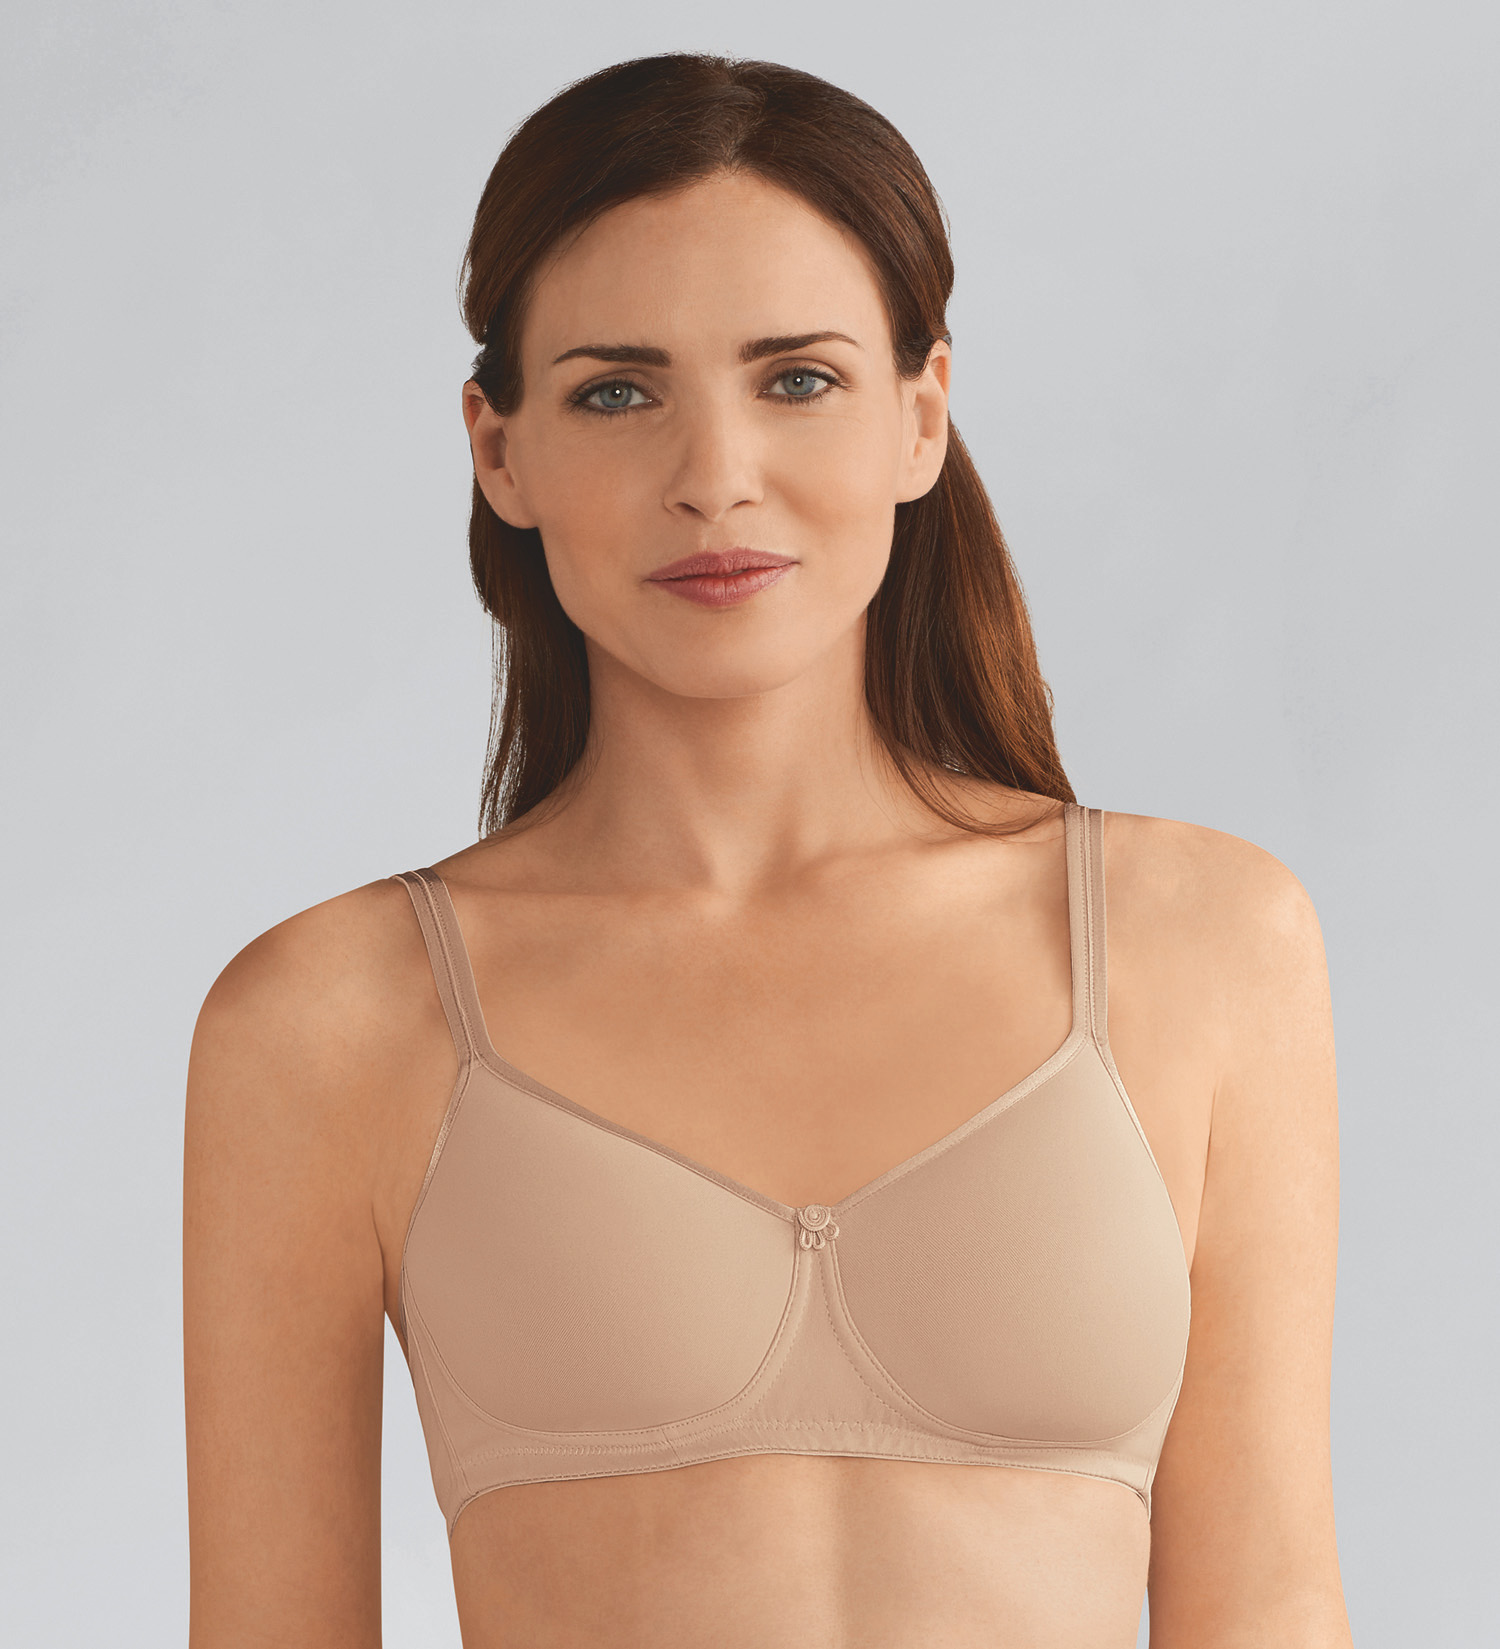 Kddylitq Mastectomy Bras With Built In Breast Forms Padded